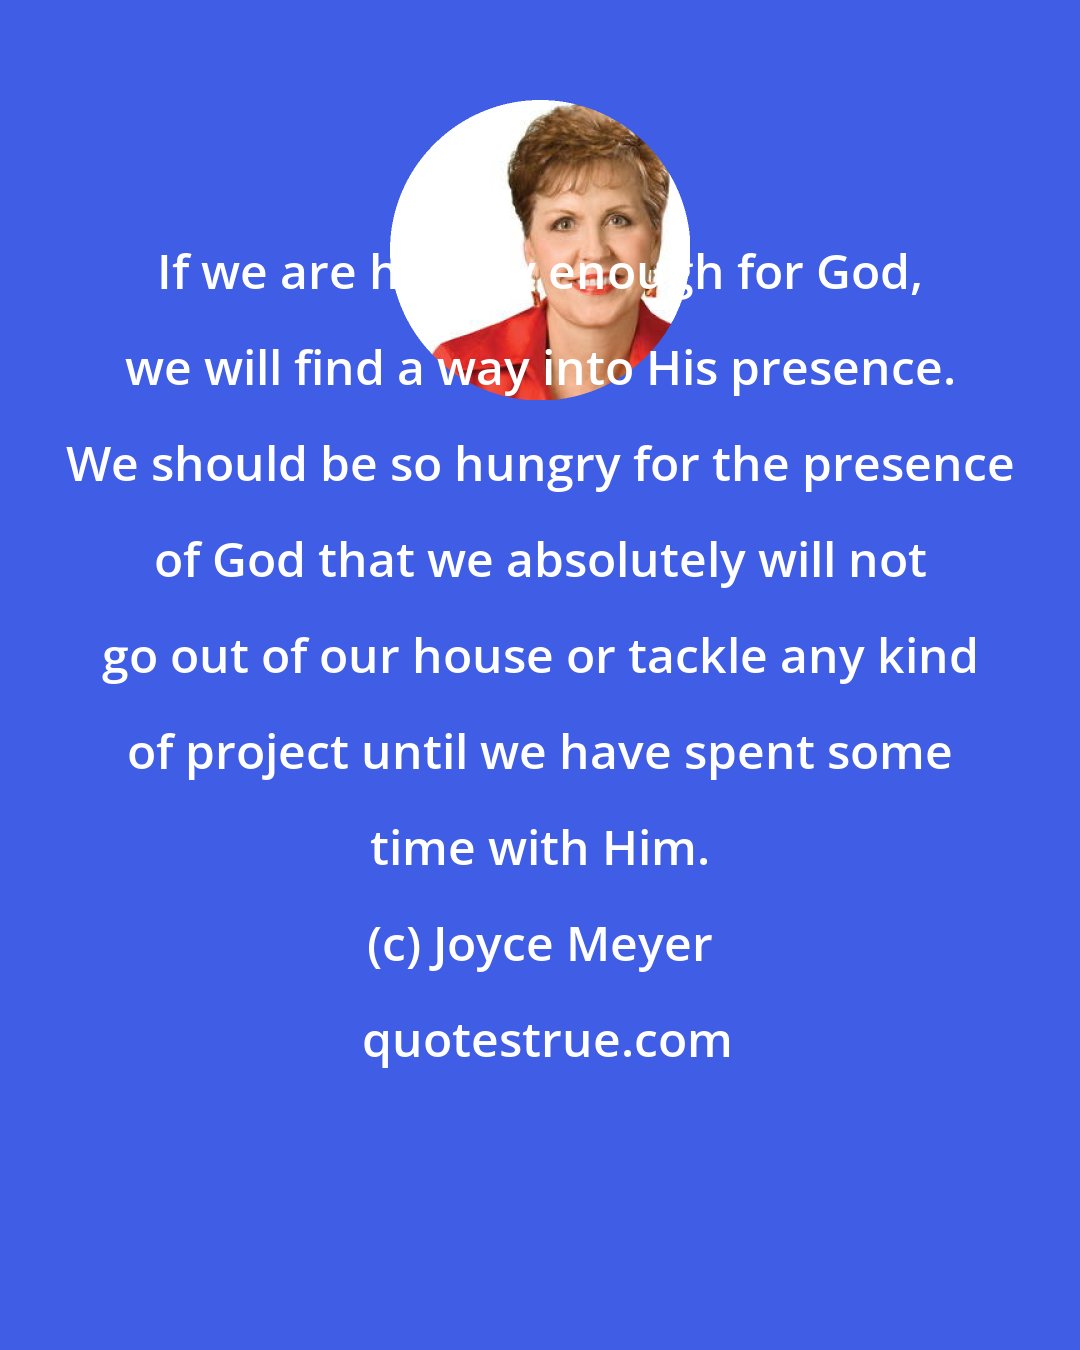 Joyce Meyer: If we are hungry enough for God, we will find a way into His presence. We should be so hungry for the presence of God that we absolutely will not go out of our house or tackle any kind of project until we have spent some time with Him.